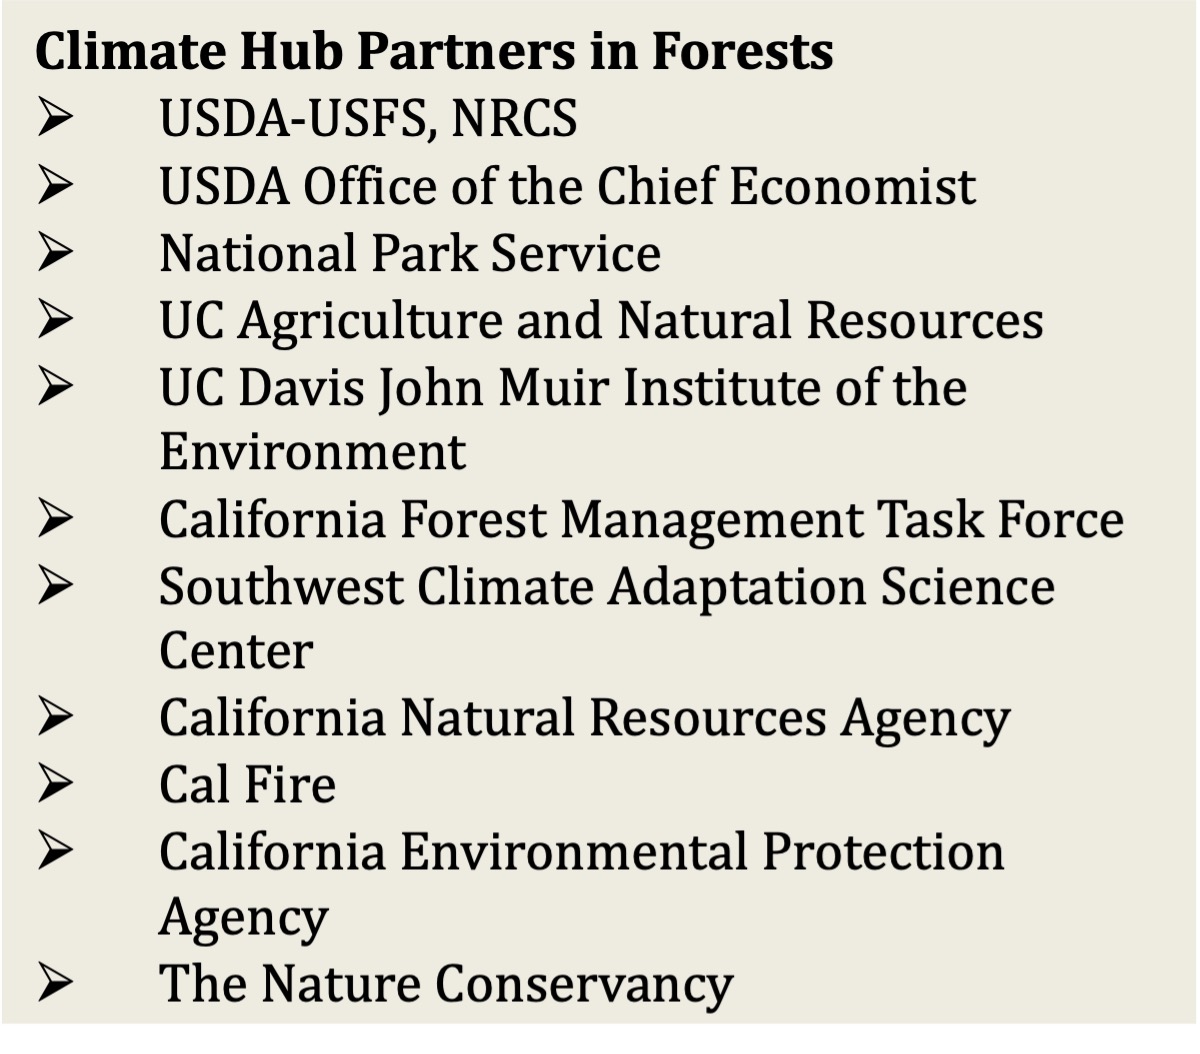 Hub forest partners